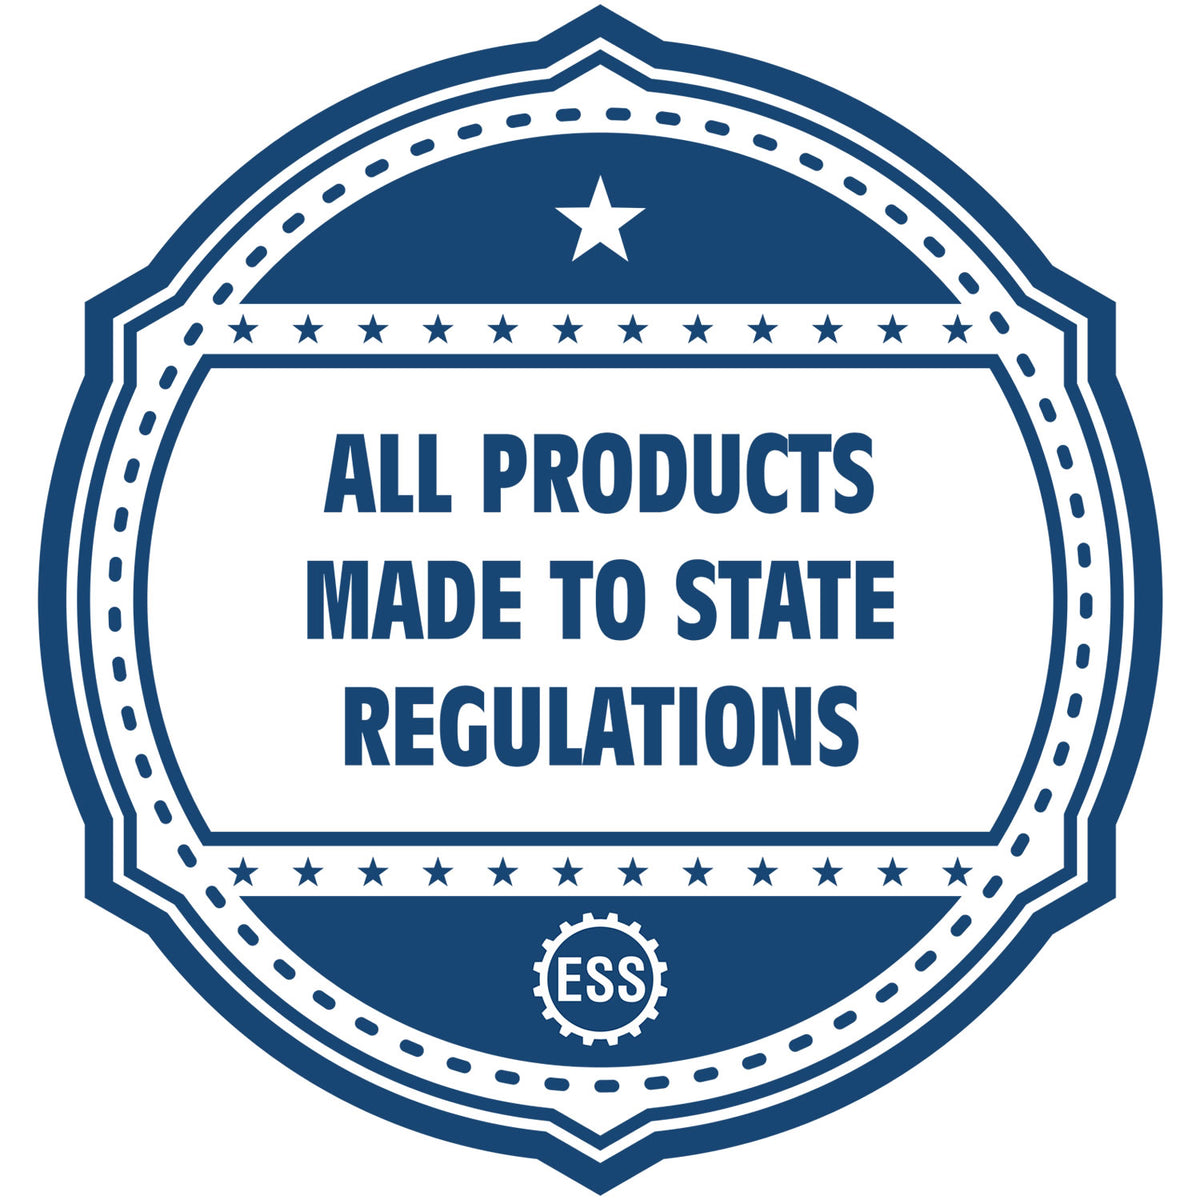 An icon or badge element for the State of Delaware Architectural Seal Embosser showing that this product is made in compliance with state regulations.